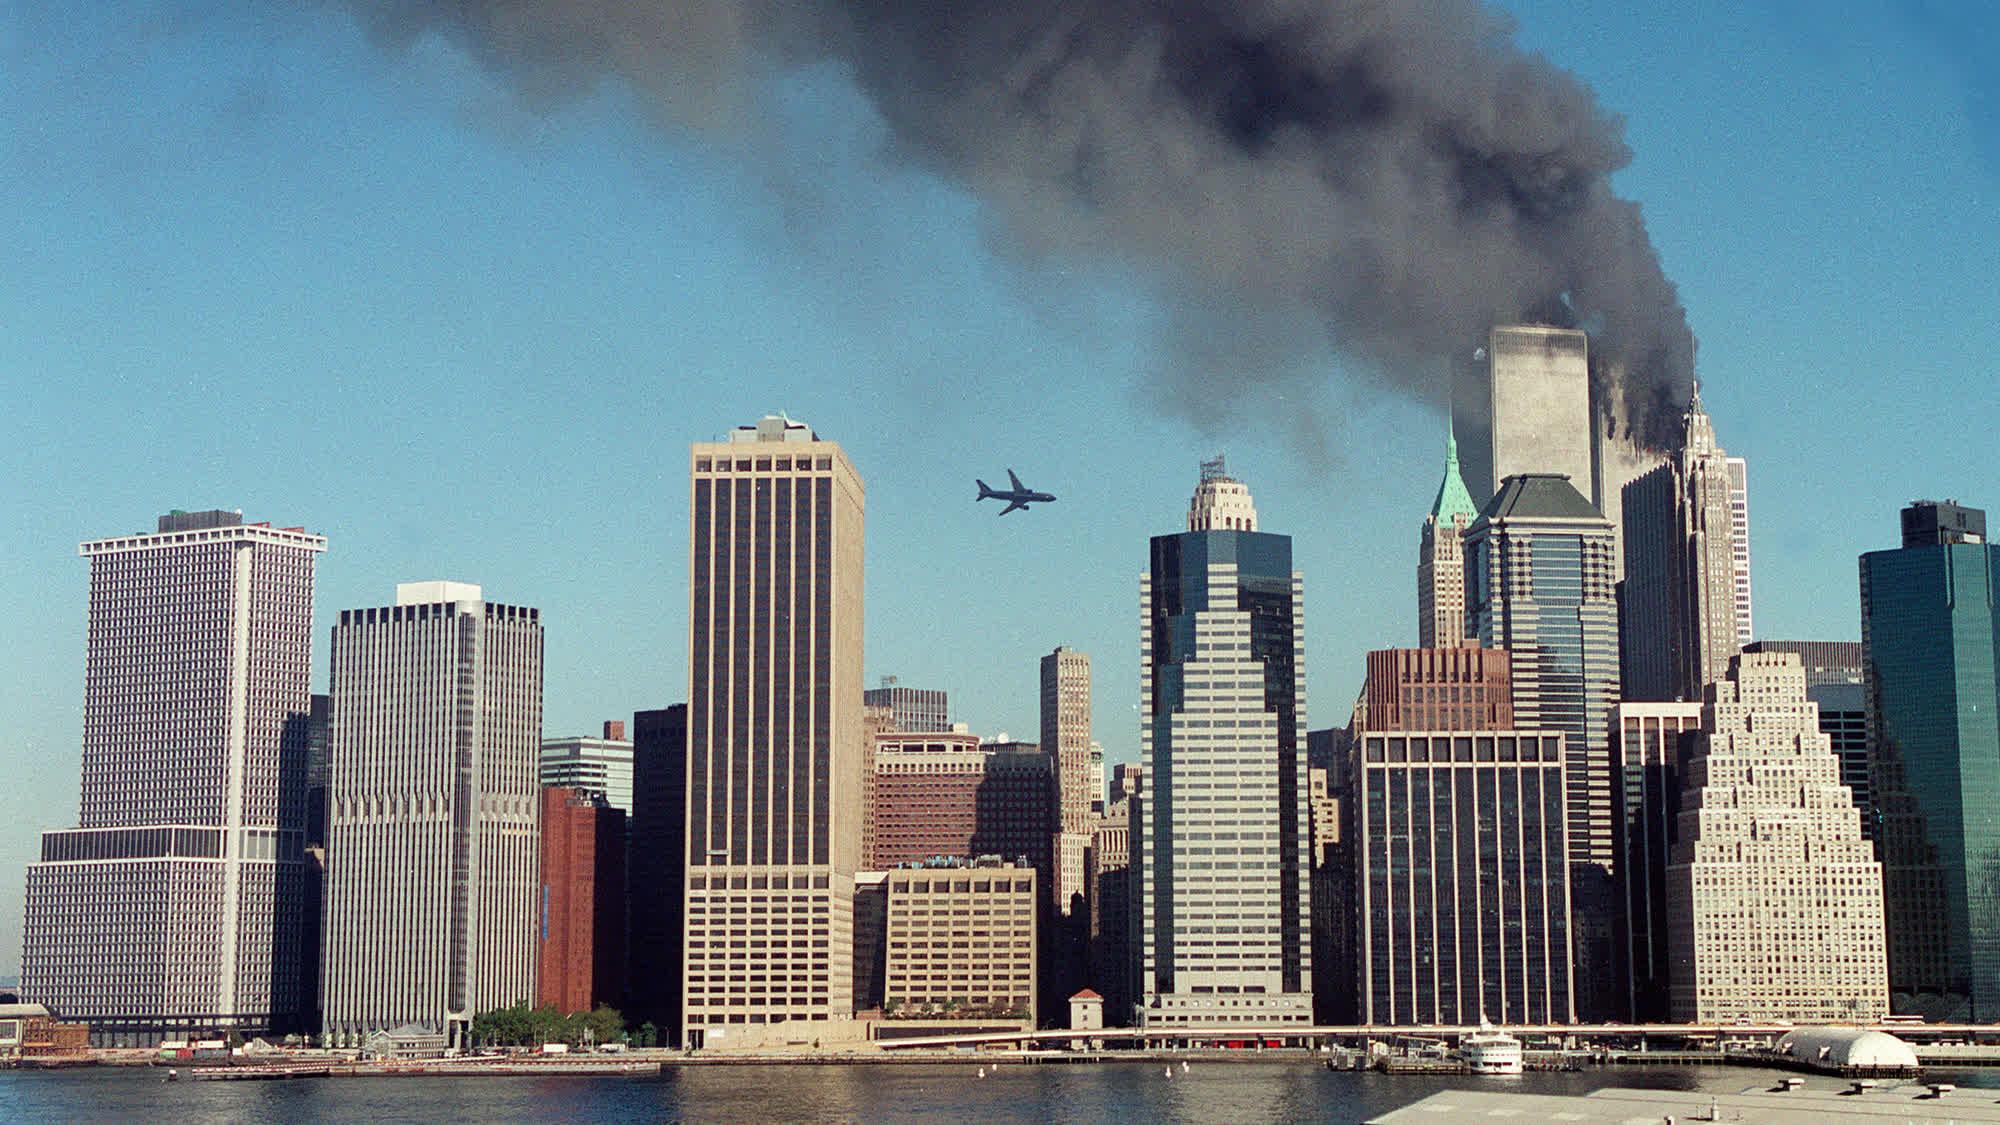 Did the US government orchestrate 9/11